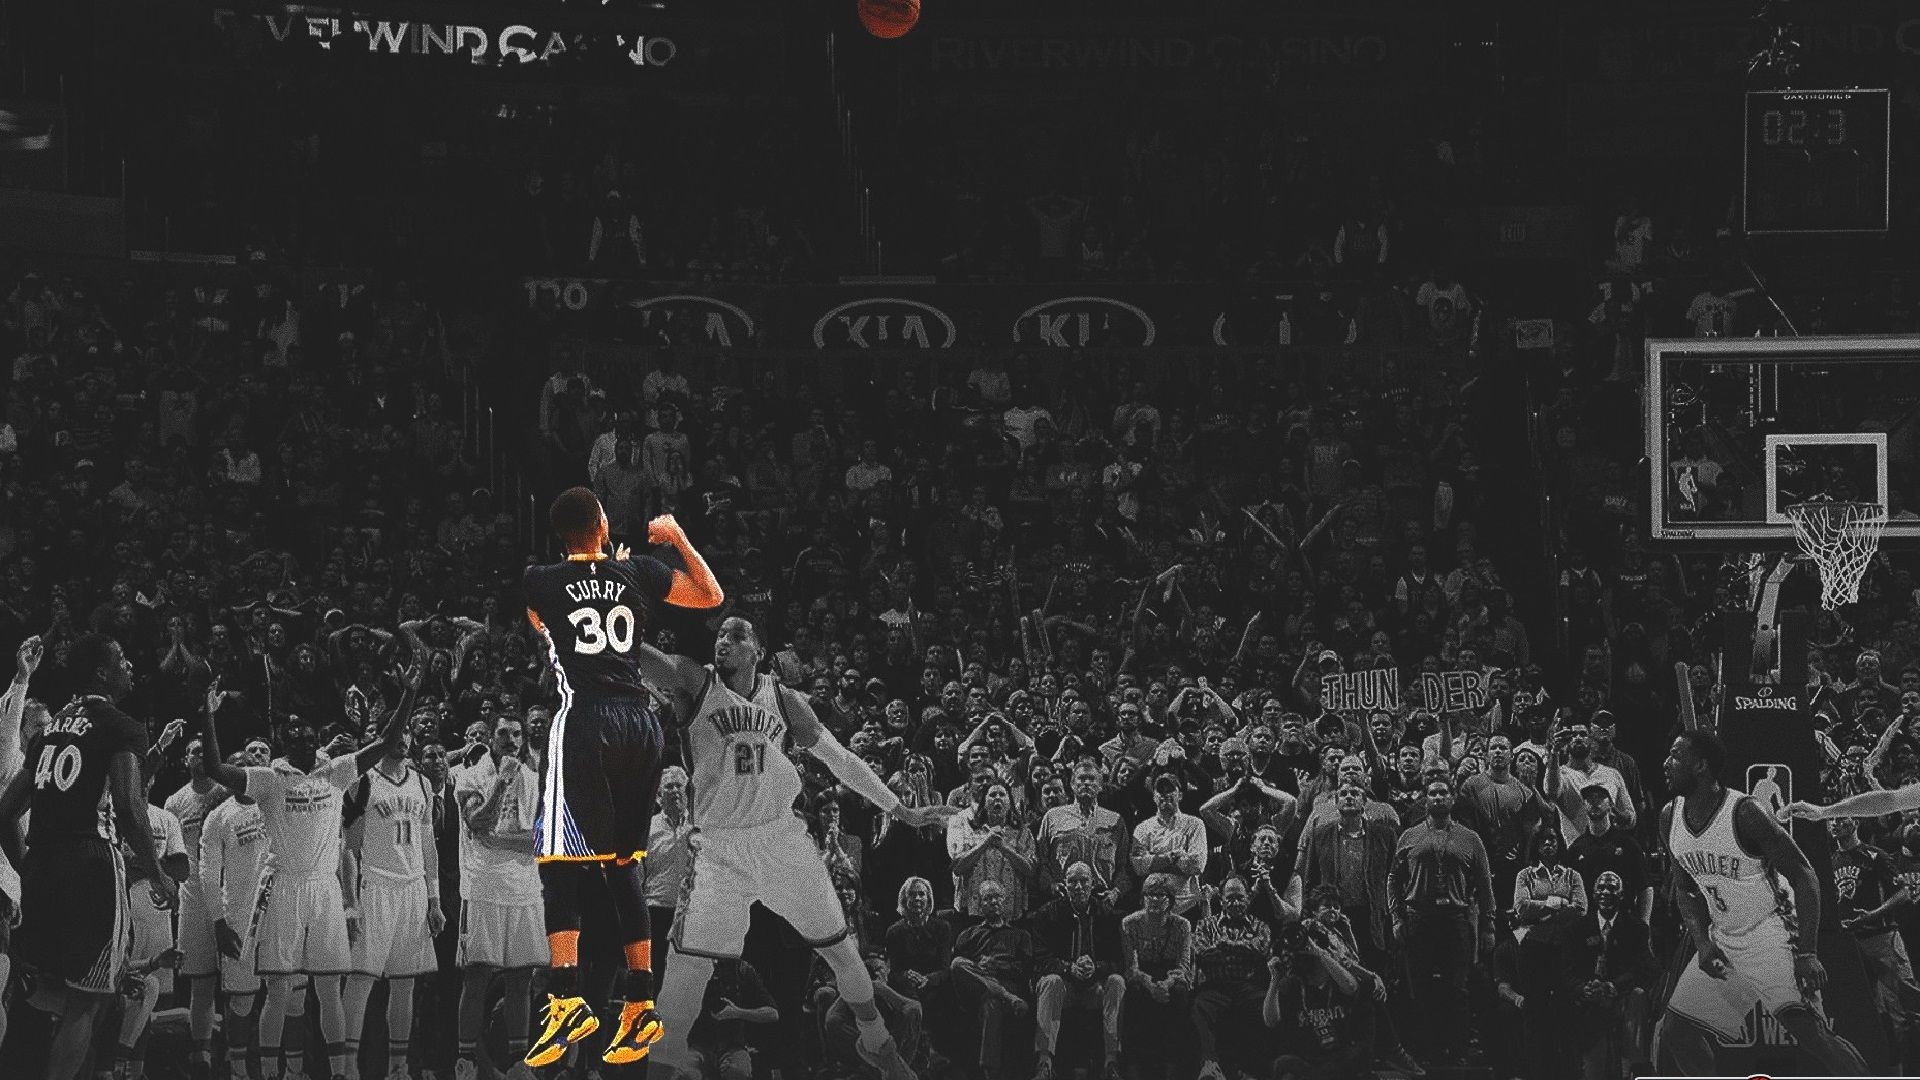 Stephen Curry 2015 wallpapers HD free download. Make this wallpaper for your desktop backgrounds, mobile backgrounds, android or iphone wallpapers, and ... - NBA